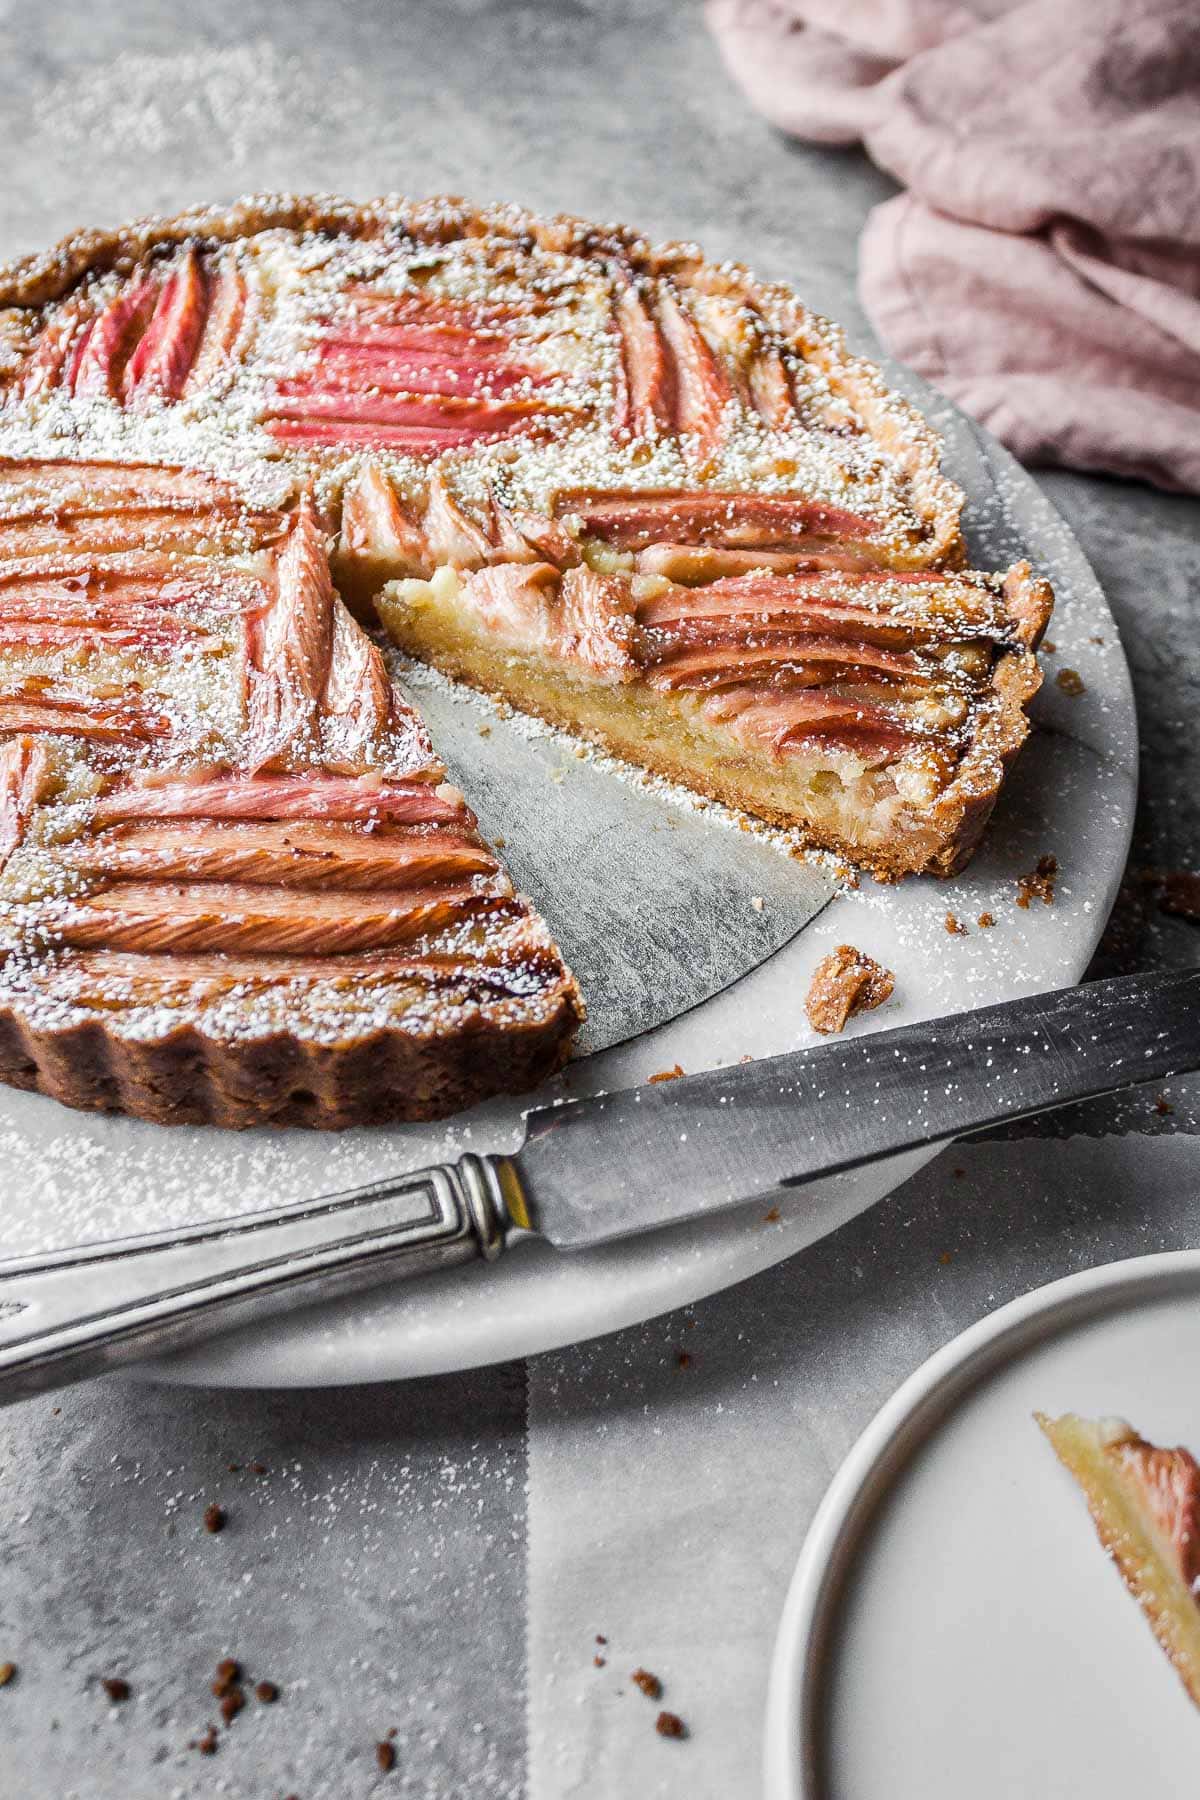 An angled view of a tart filled with almond cream and rhubarb.